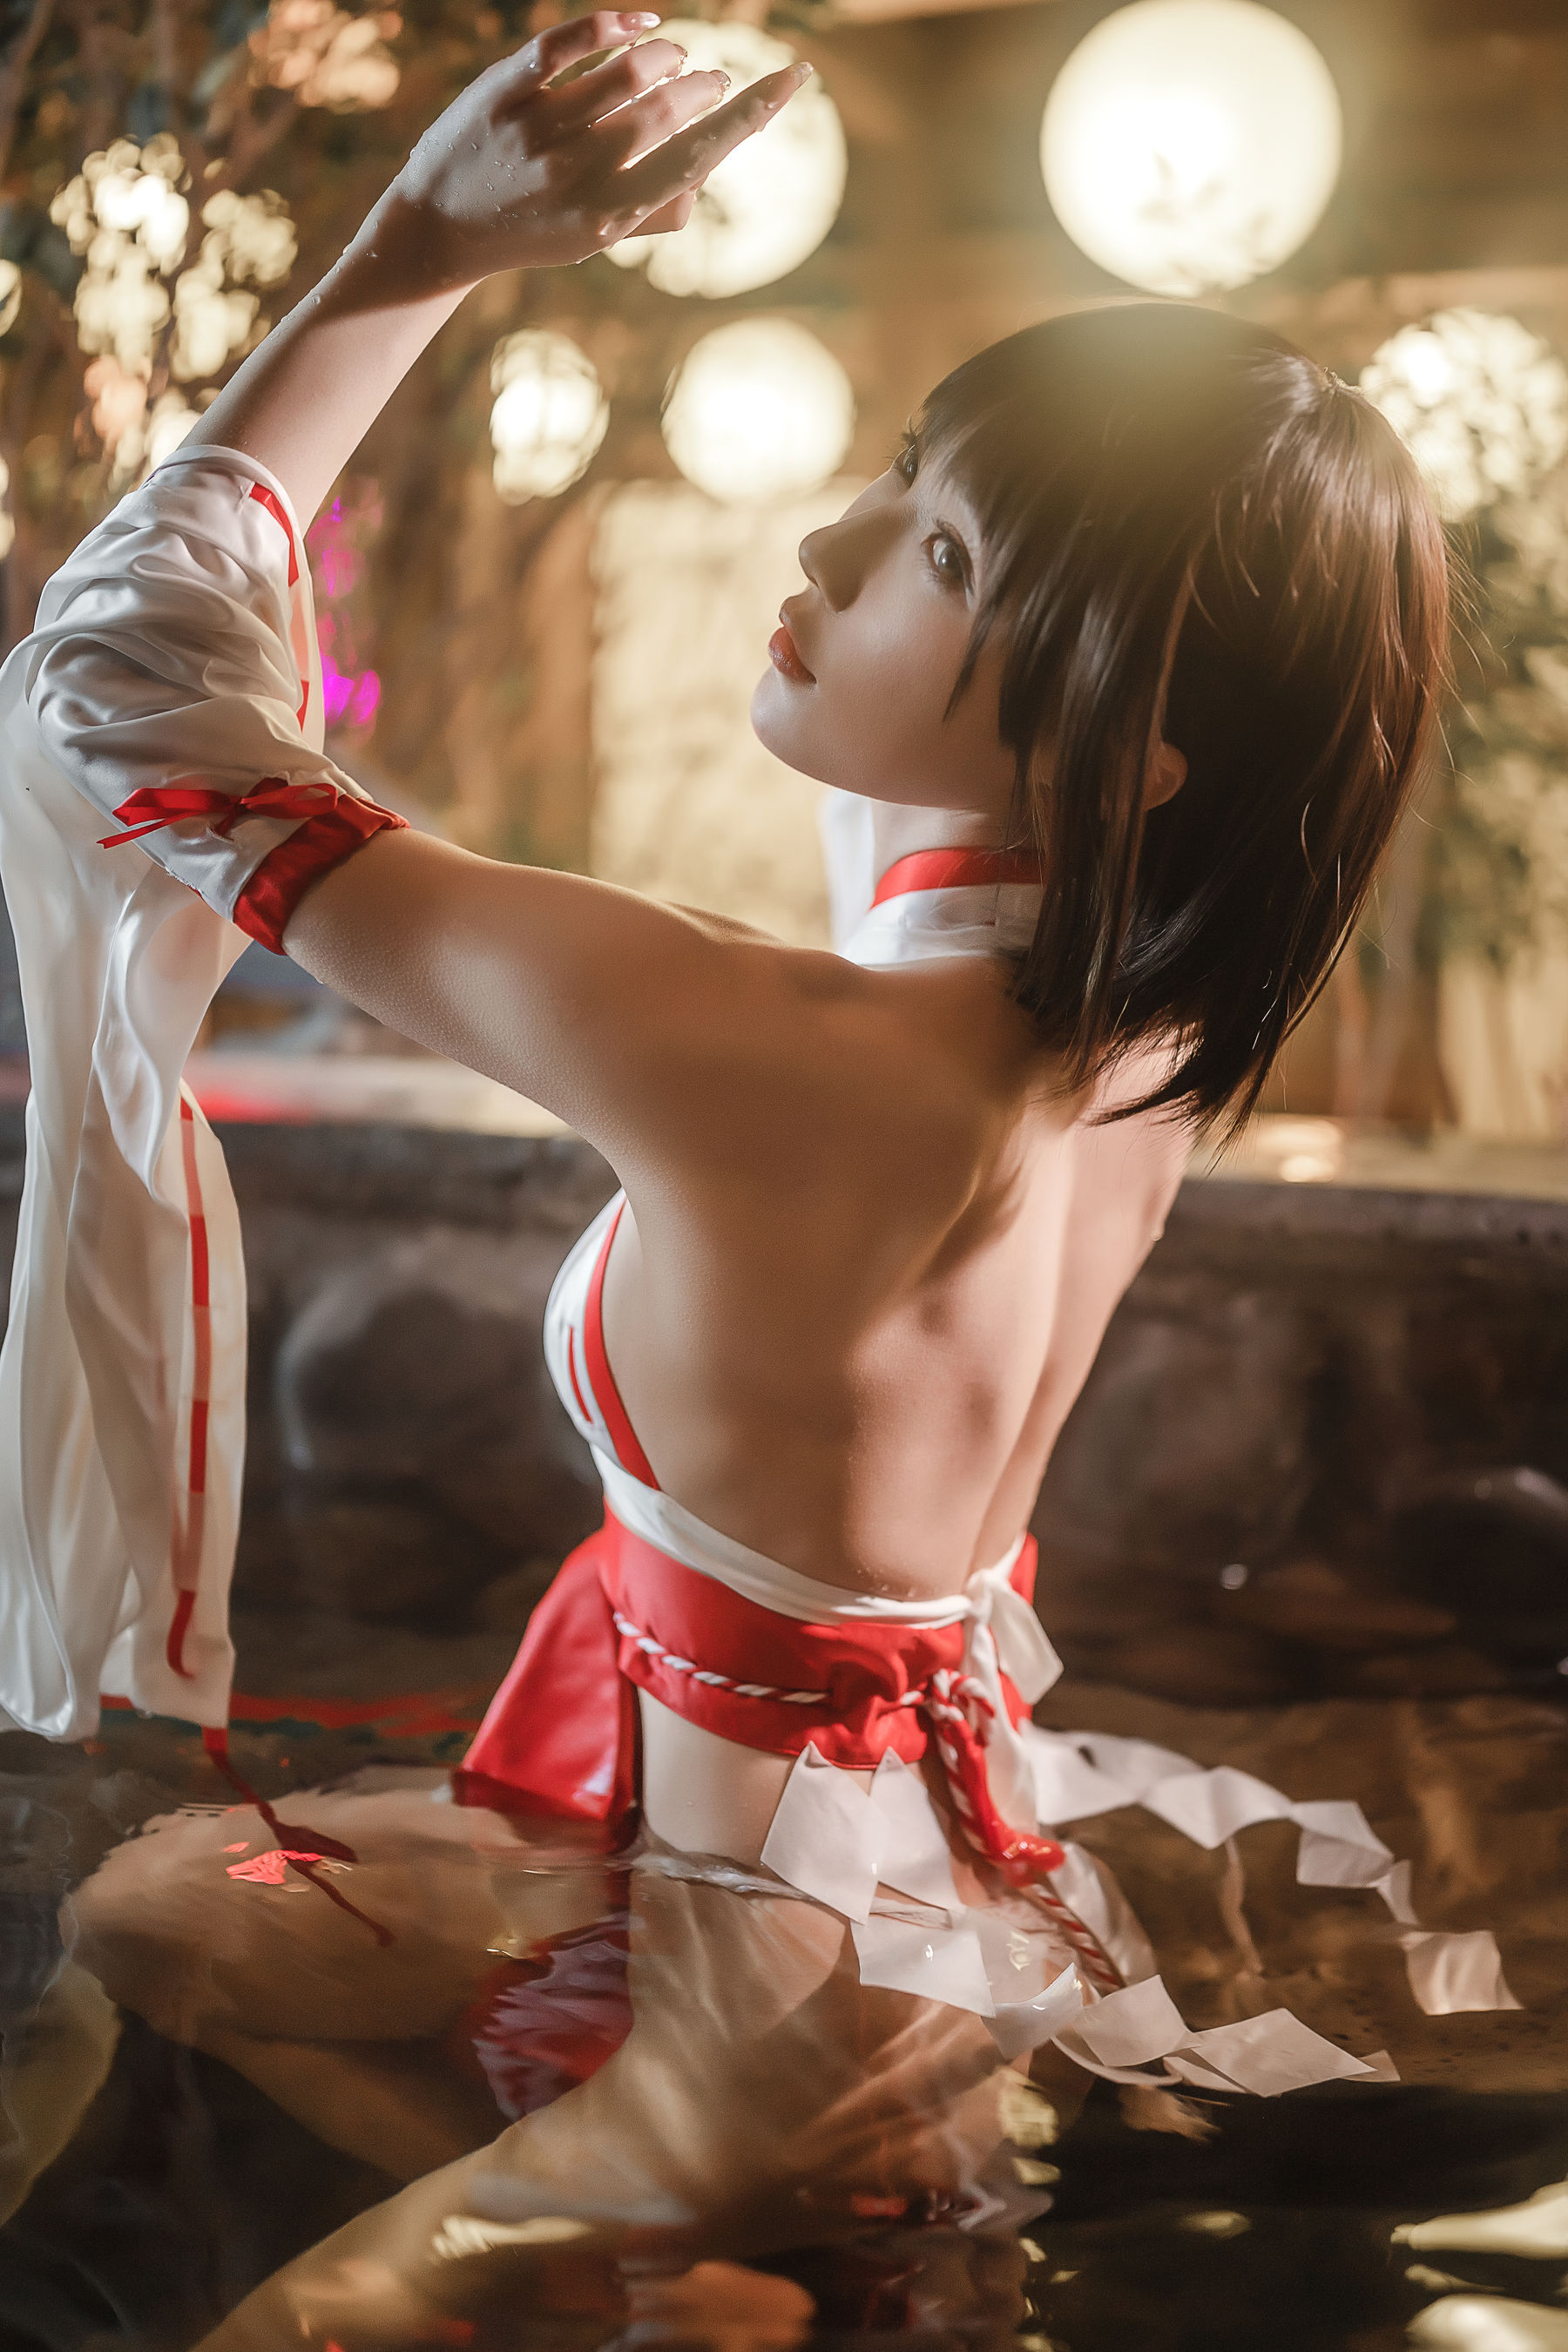 [Net Red COSER Photo] Anime blogger A Bao is also a rabbit girl - Hot Spring Miko Page 1 No.821429